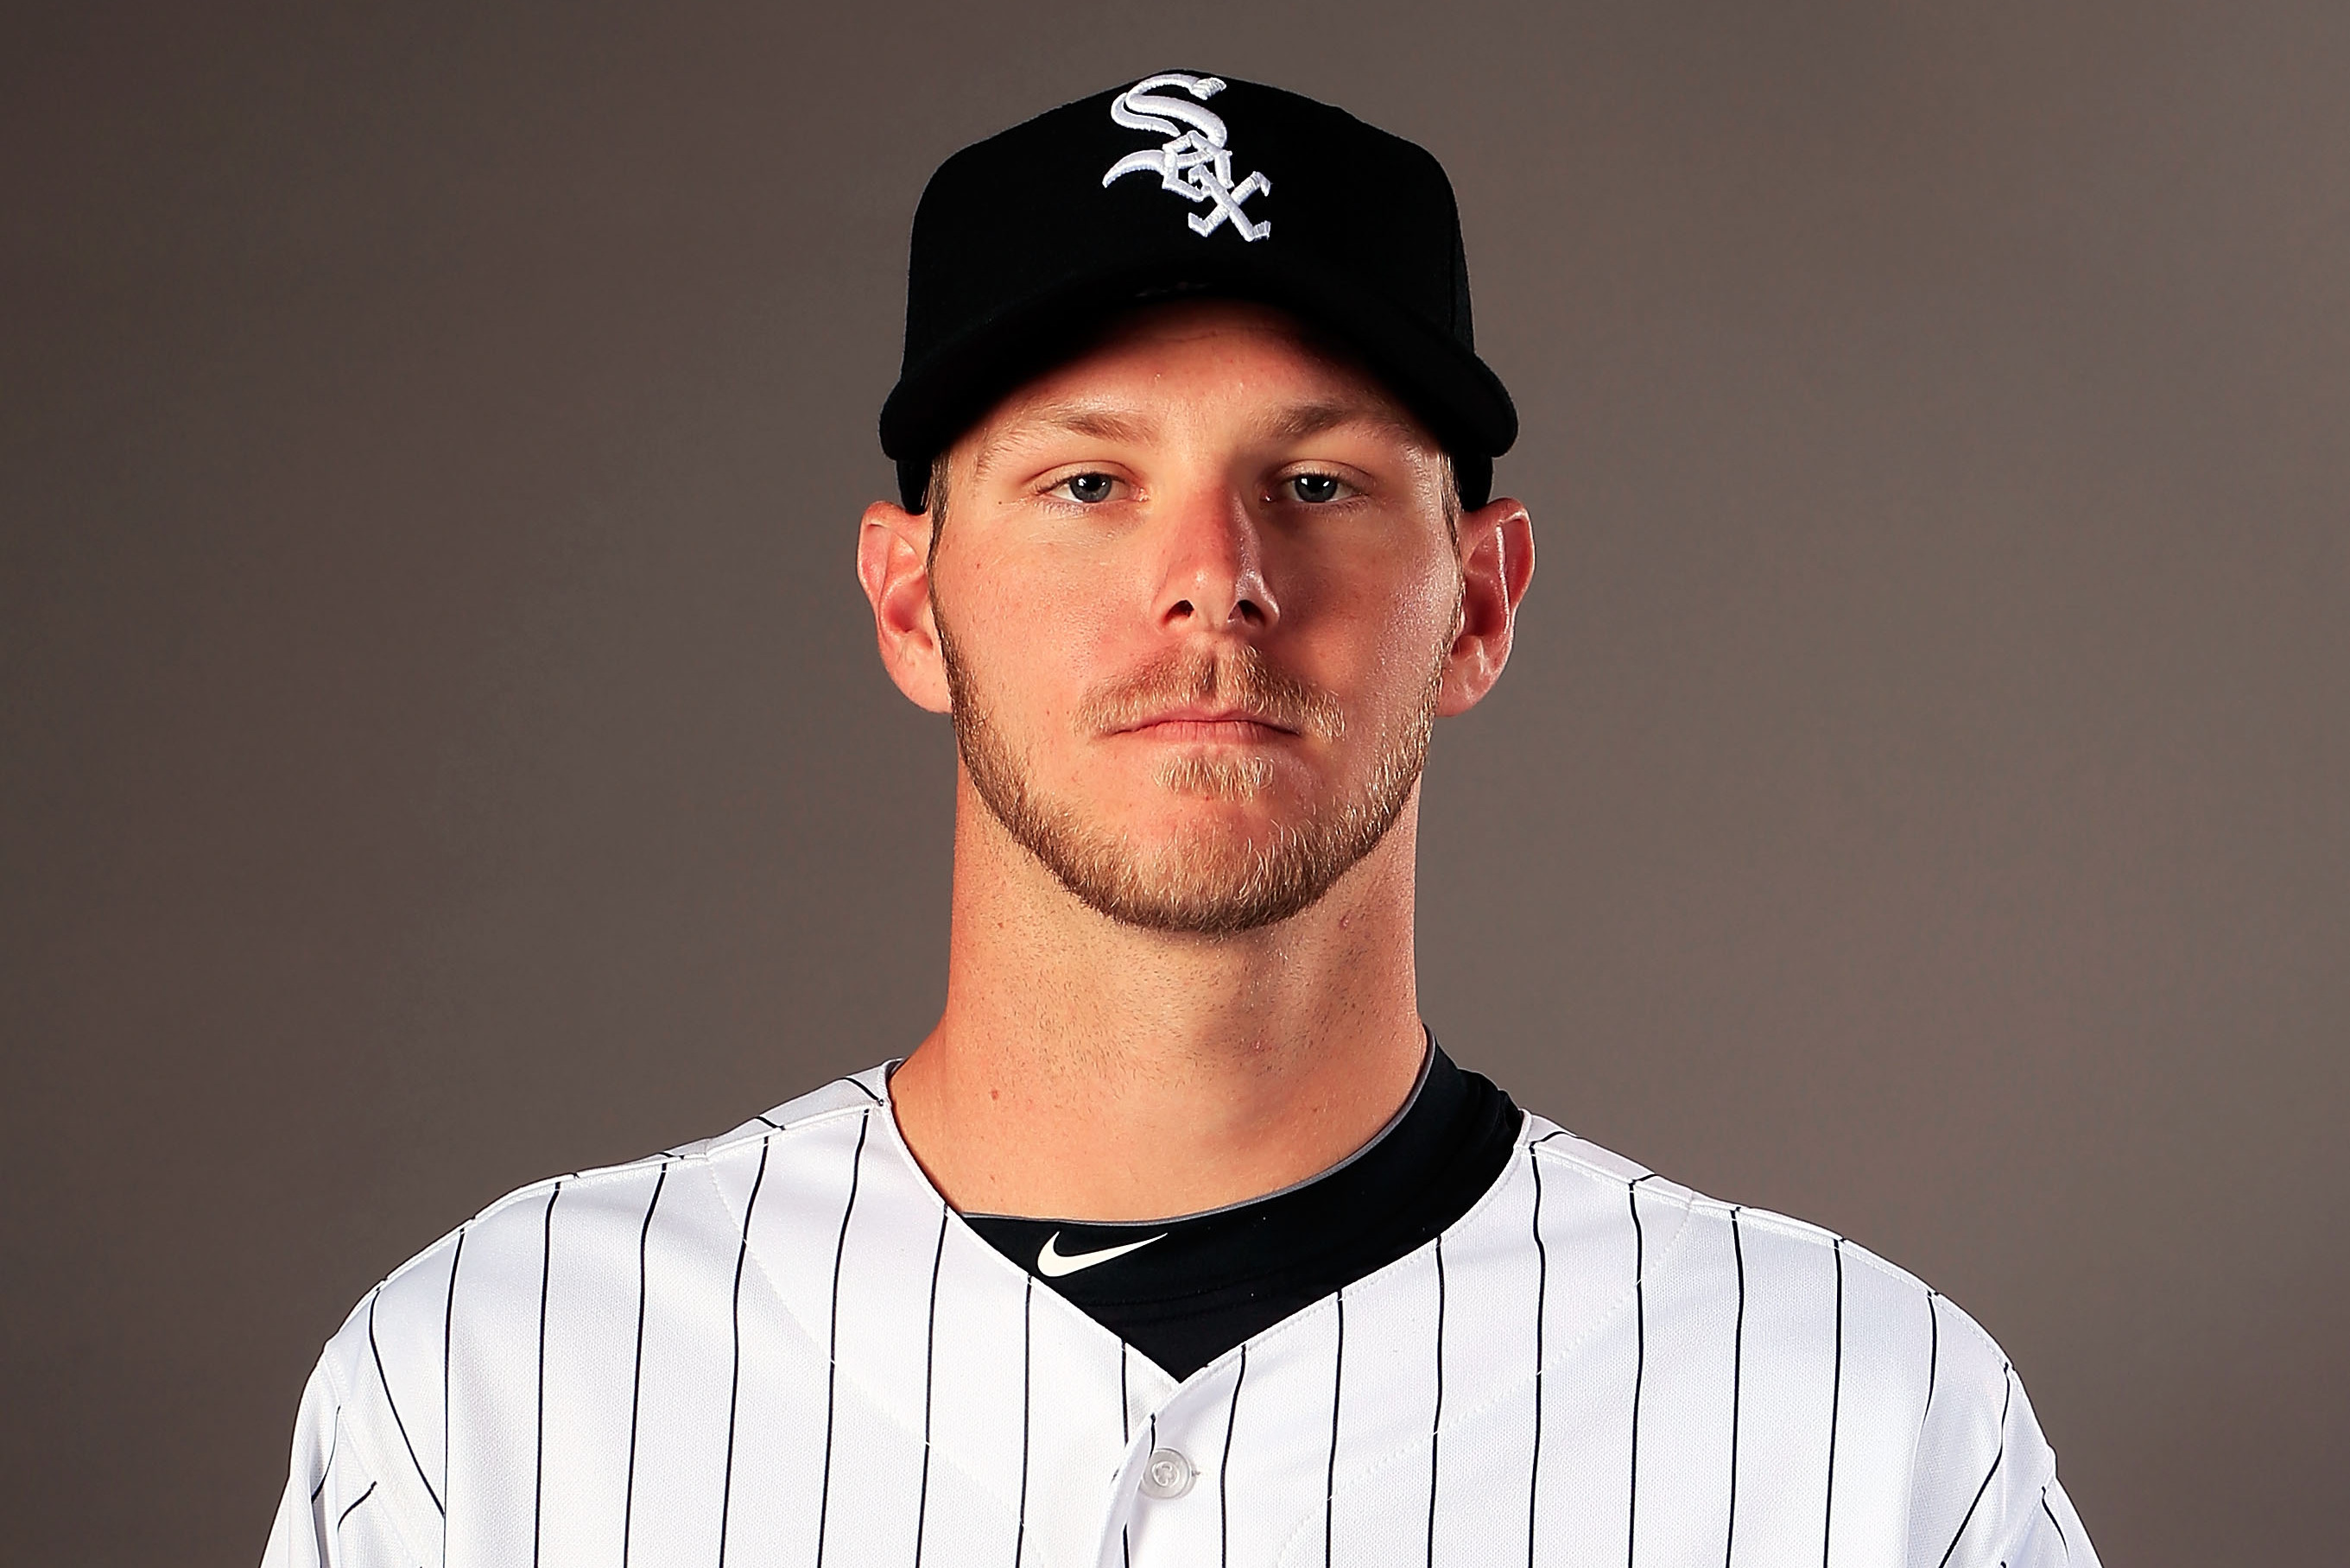 White Sox's Chris Sale not crazy, just competitive